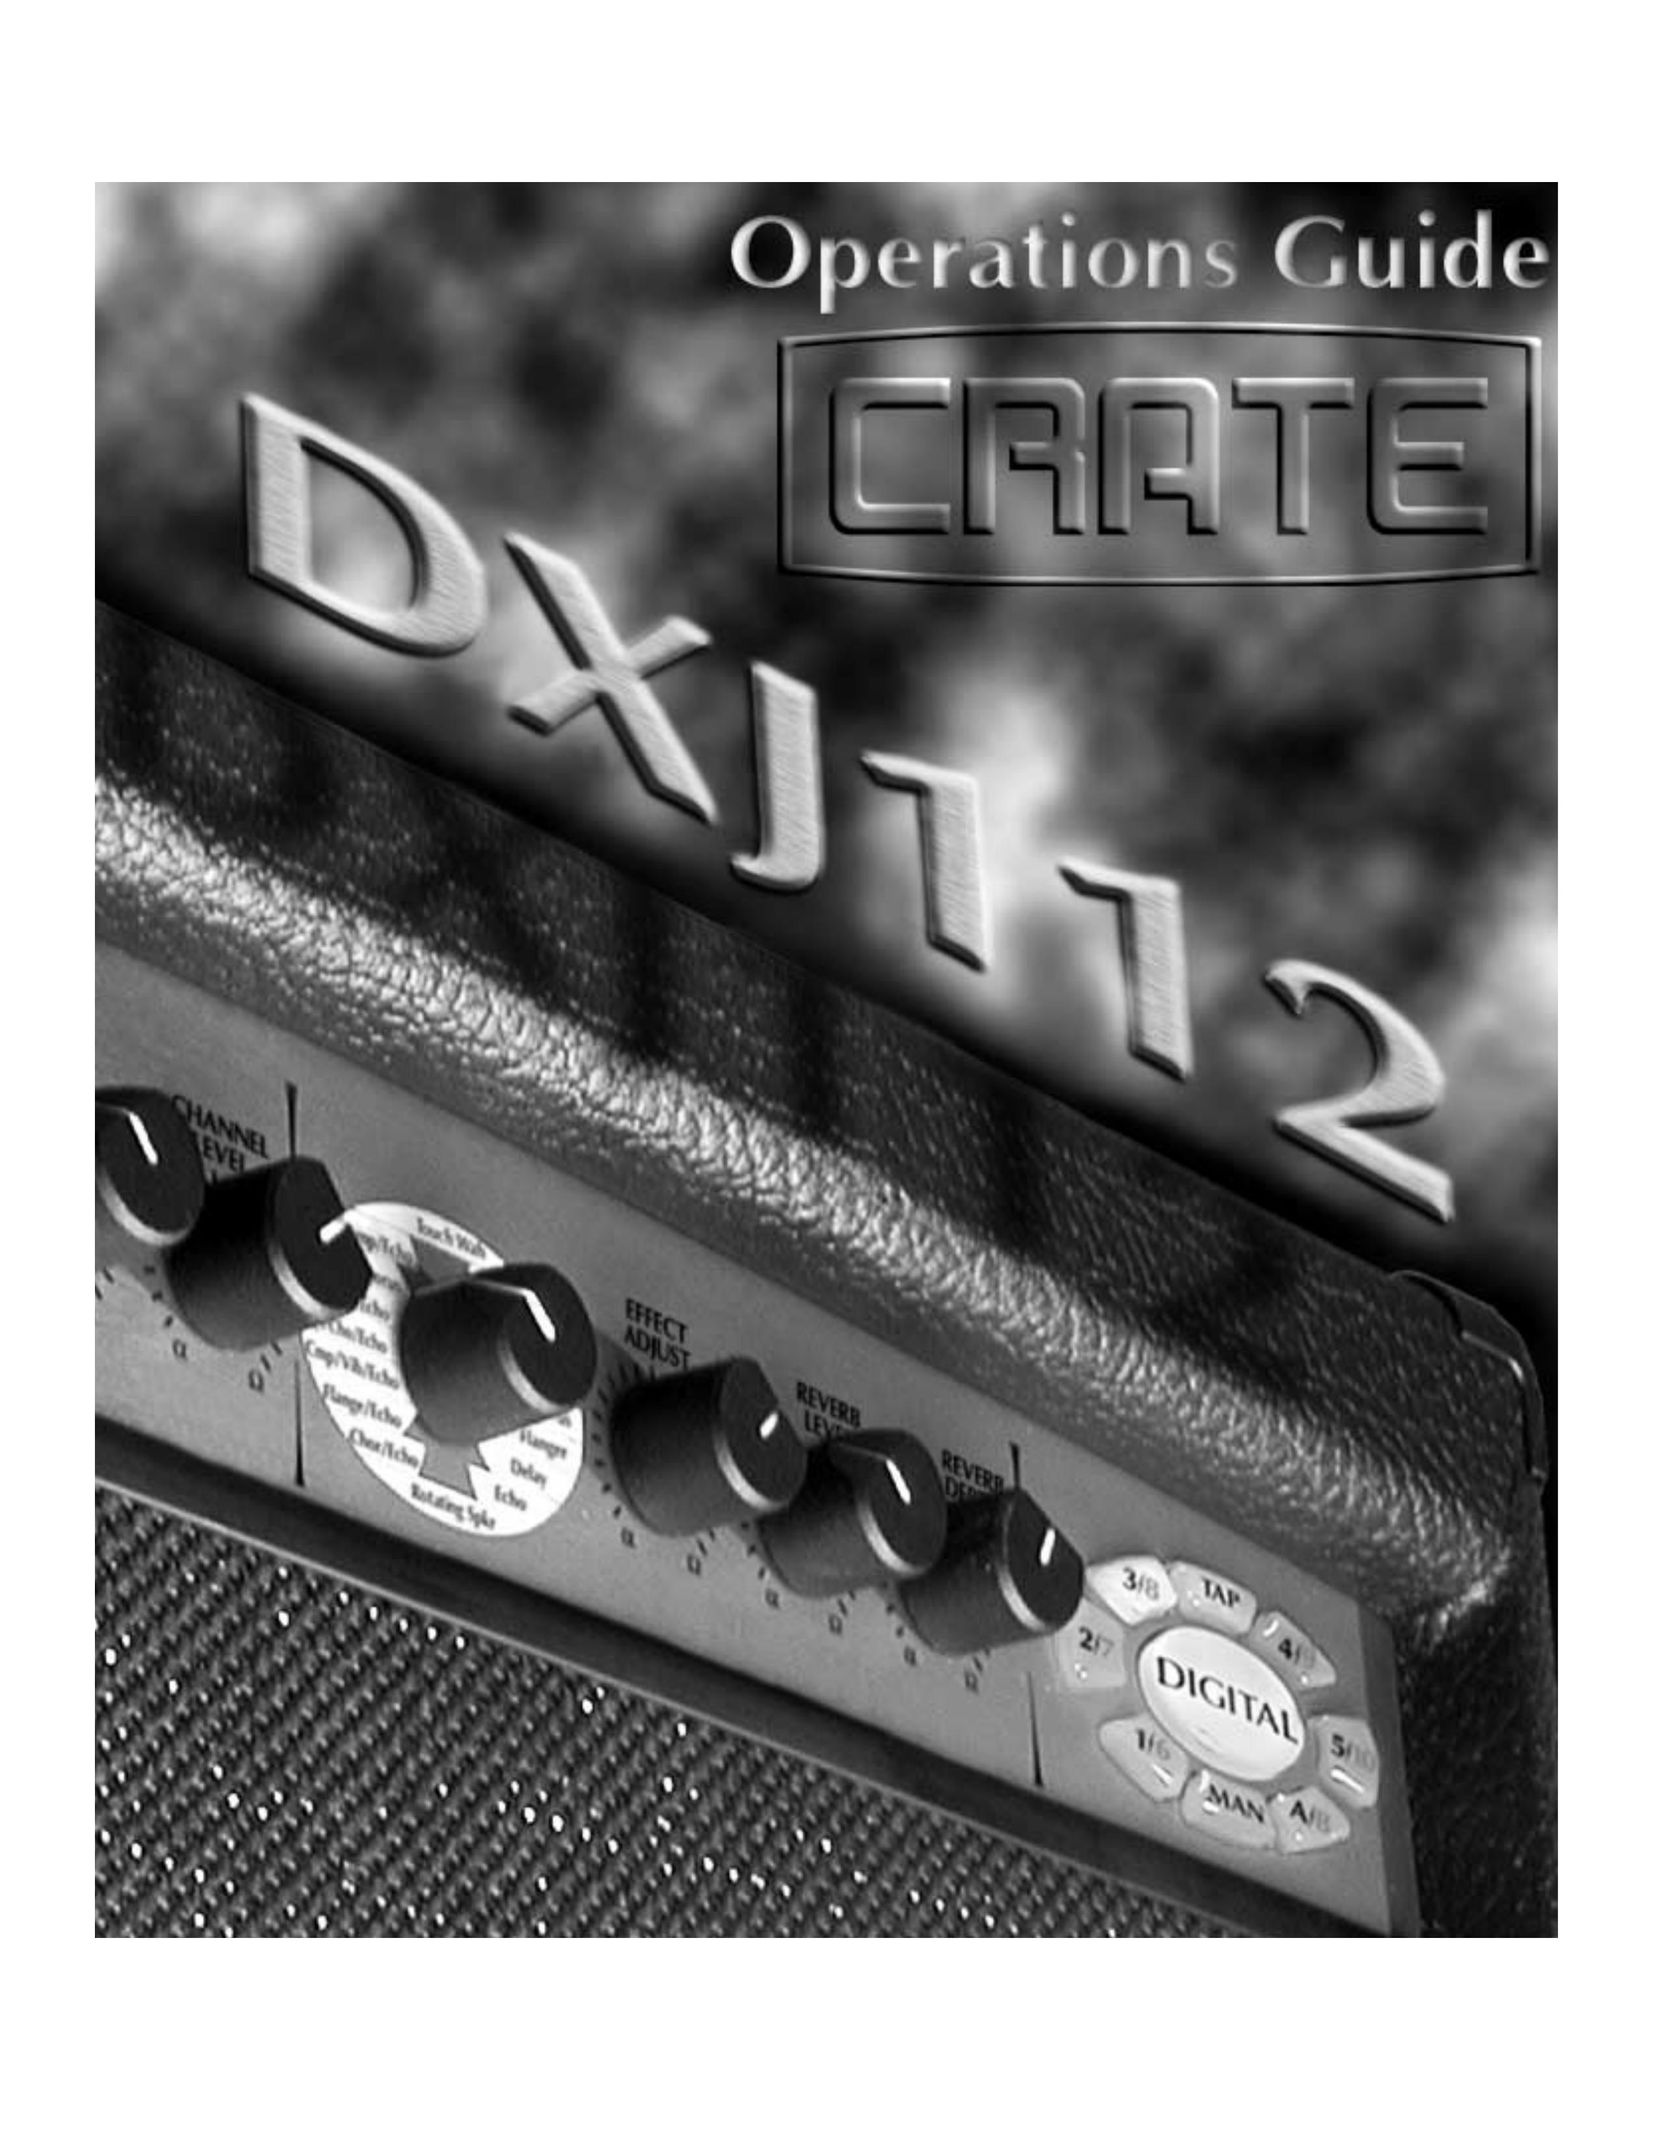 Crate Amplifiers DXJ112 Stereo Amplifier User Manual